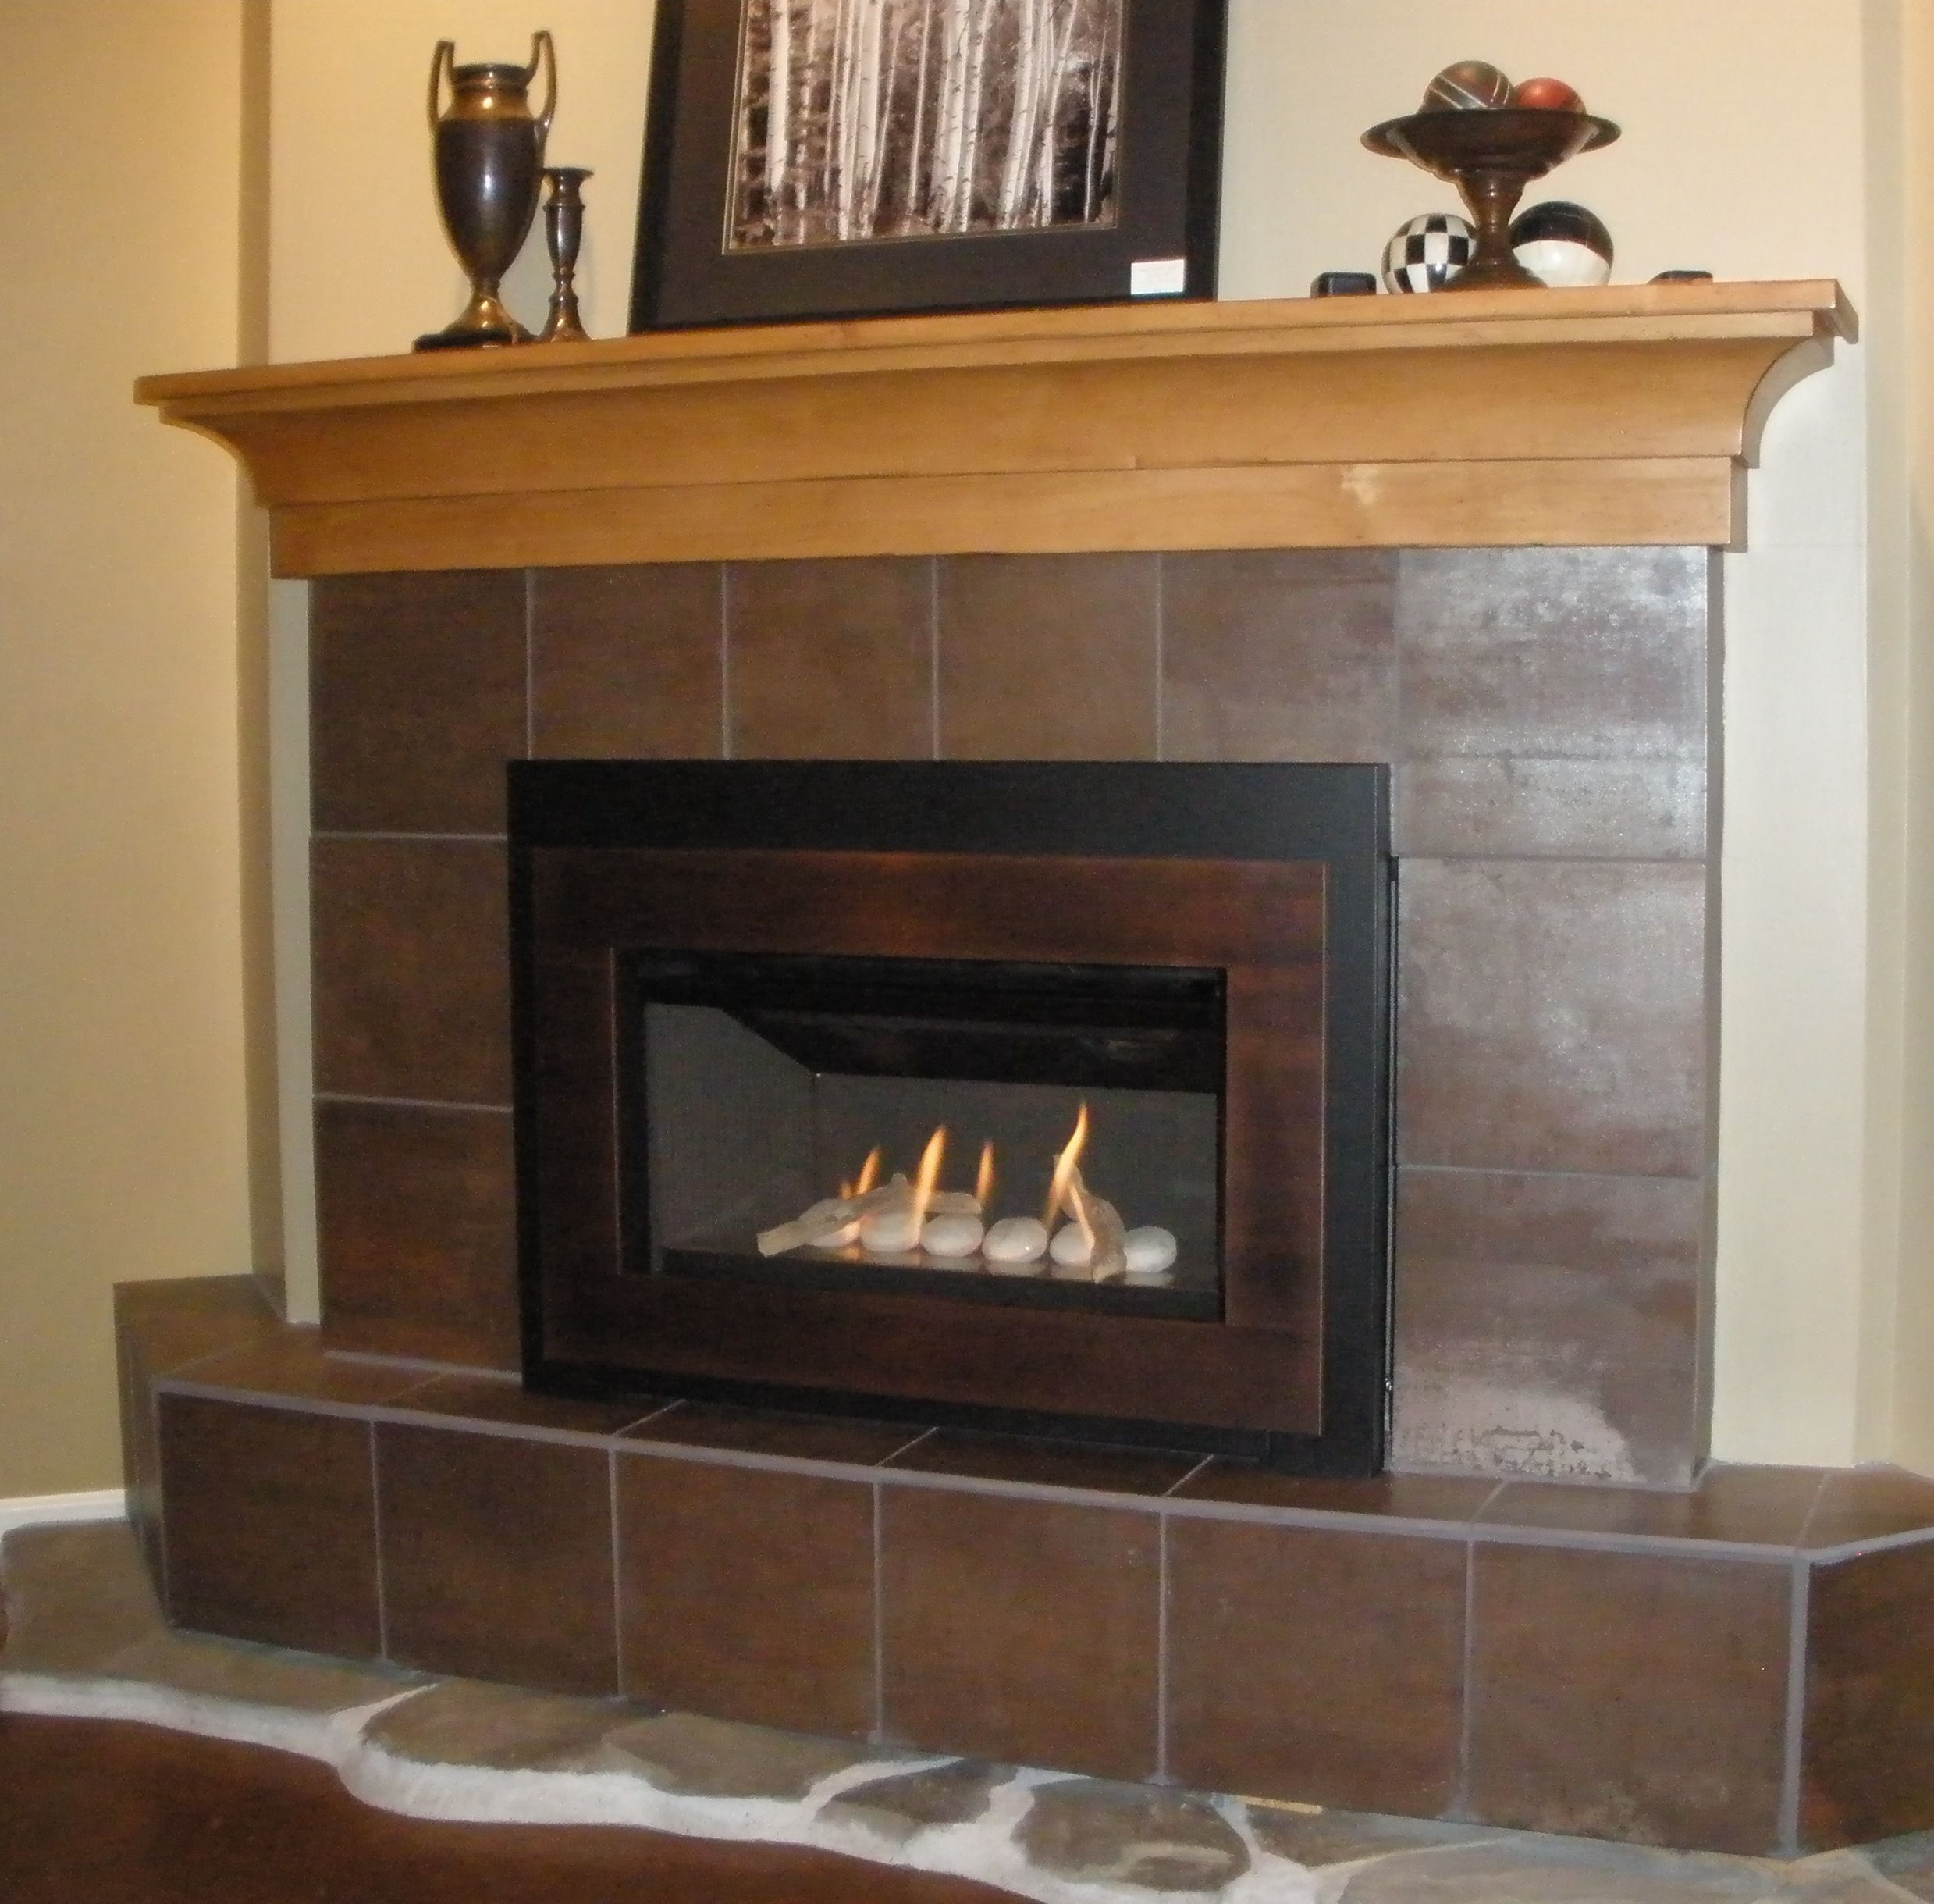 Modern Ventless Gas Fireplace Best Of Pin On Valor Radiant Gas Fireplaces Midwest Dealer